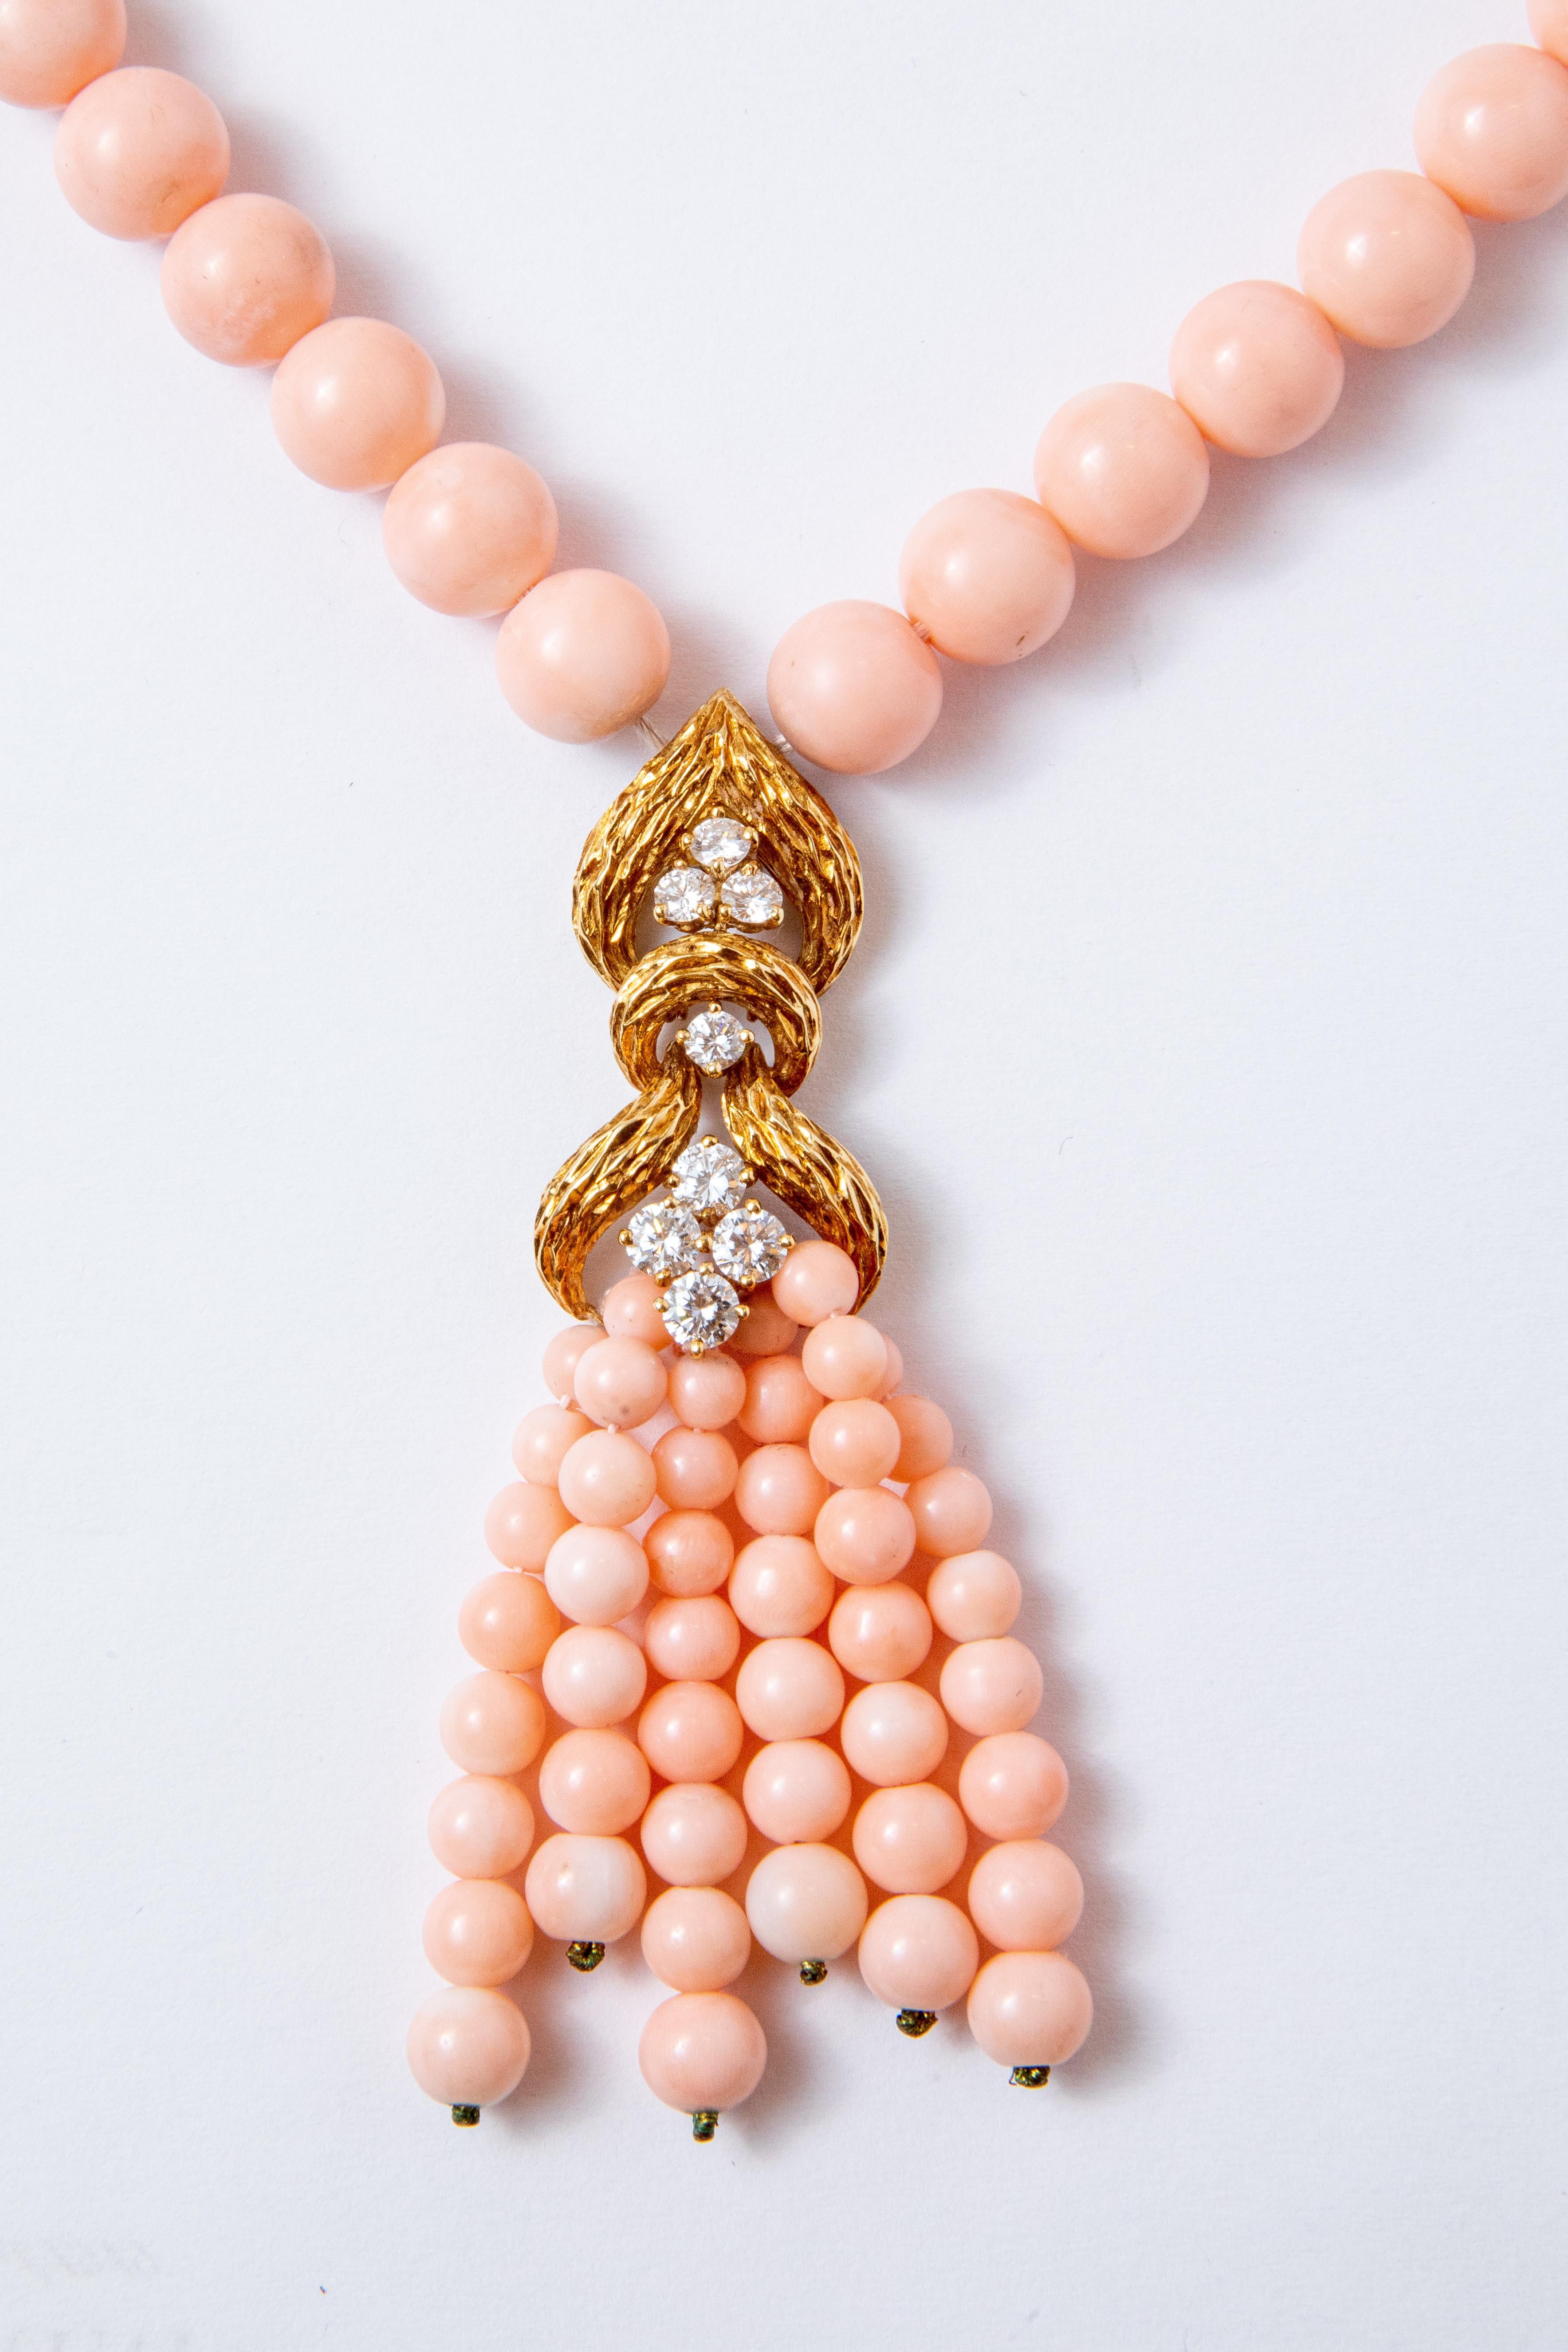 Necklace made of pink coral balls (Corallium japonicum), in the center a gold pear-shaped decoration set with brilliant-cut diamonds holding a cascade of falling coral balls.
Signed M. Gérard and numbered CS848, Special order